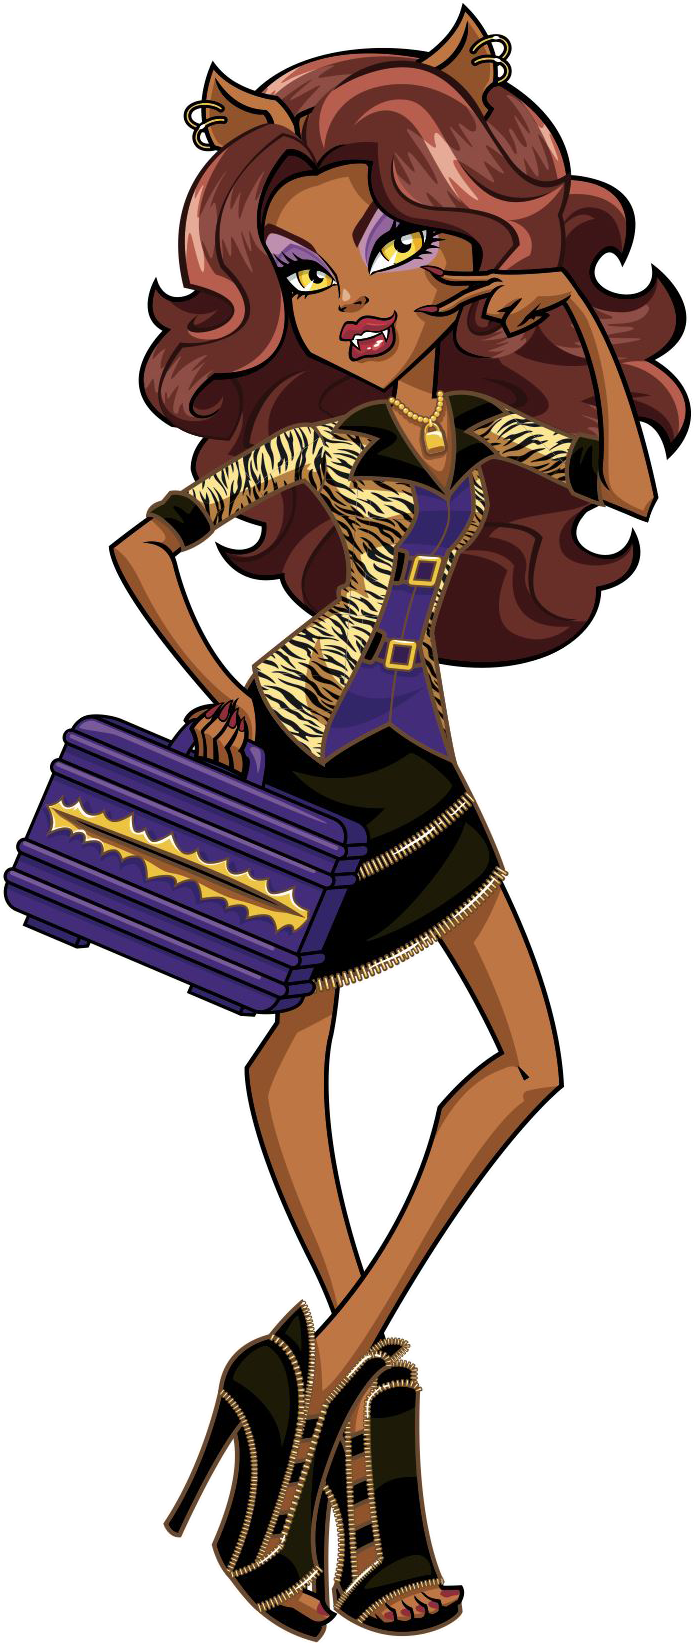 Confident And Fierce, She Is Considered The School's - Werewolf Girl From Monster High (694x1646)